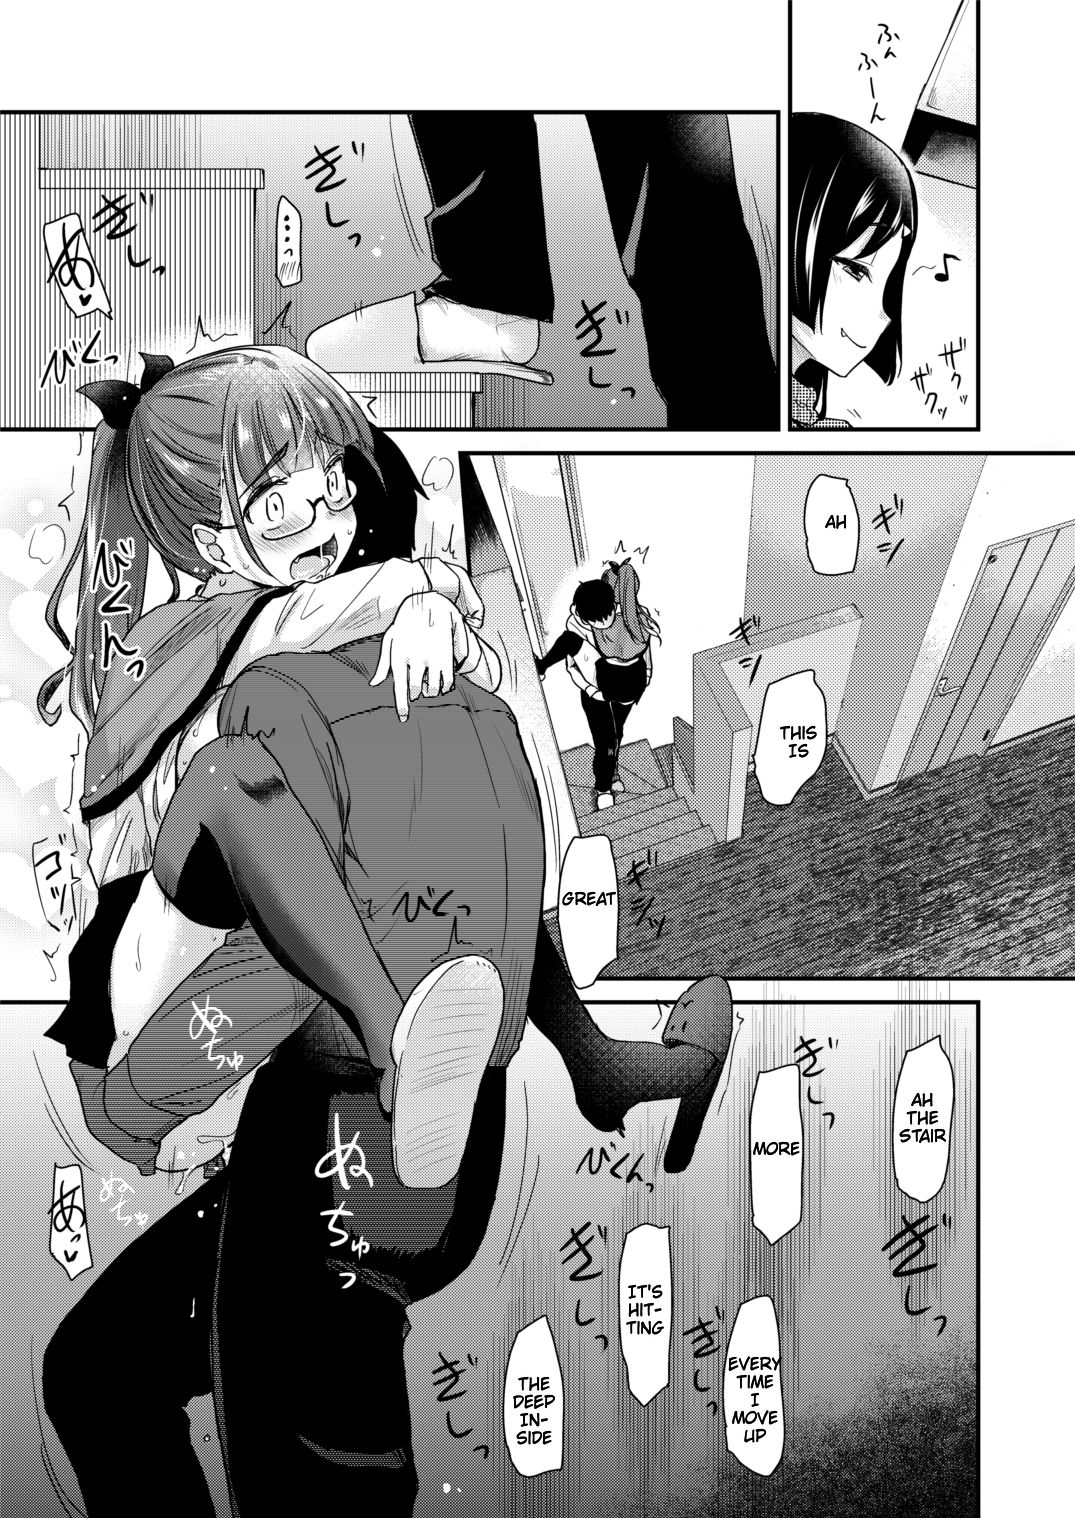 Anime Brother And Sister Sex Comics - Hijiri Tsukasa Sister was thinking about her younger brother sexua ... |  Top Hentai Comics